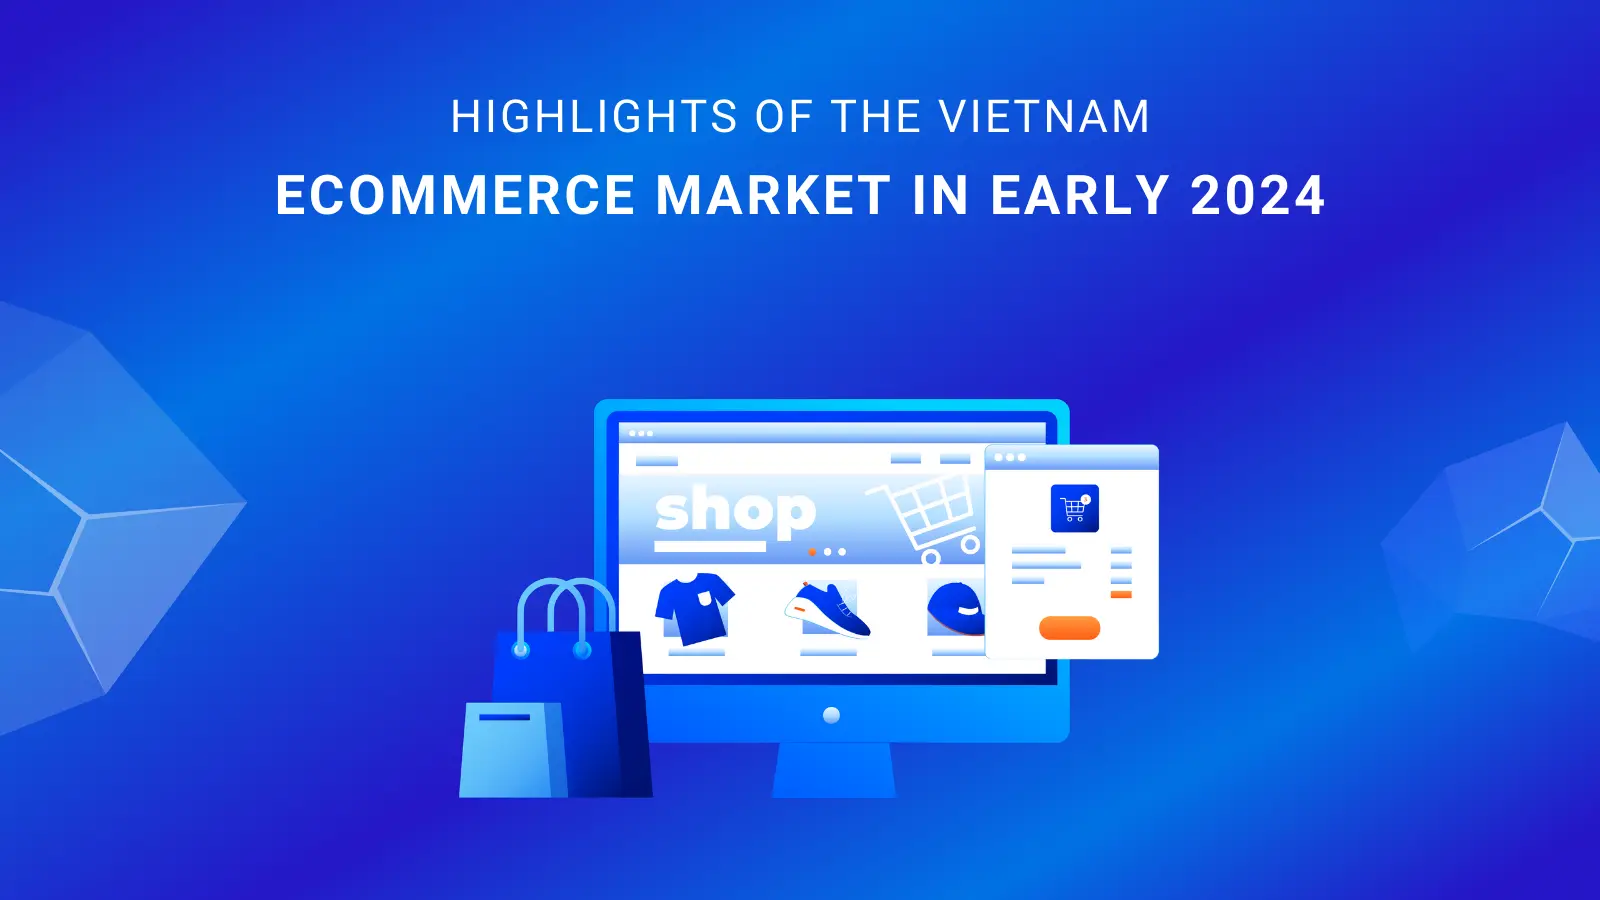 Highlights of Vietnam eCommerce in Early 2024